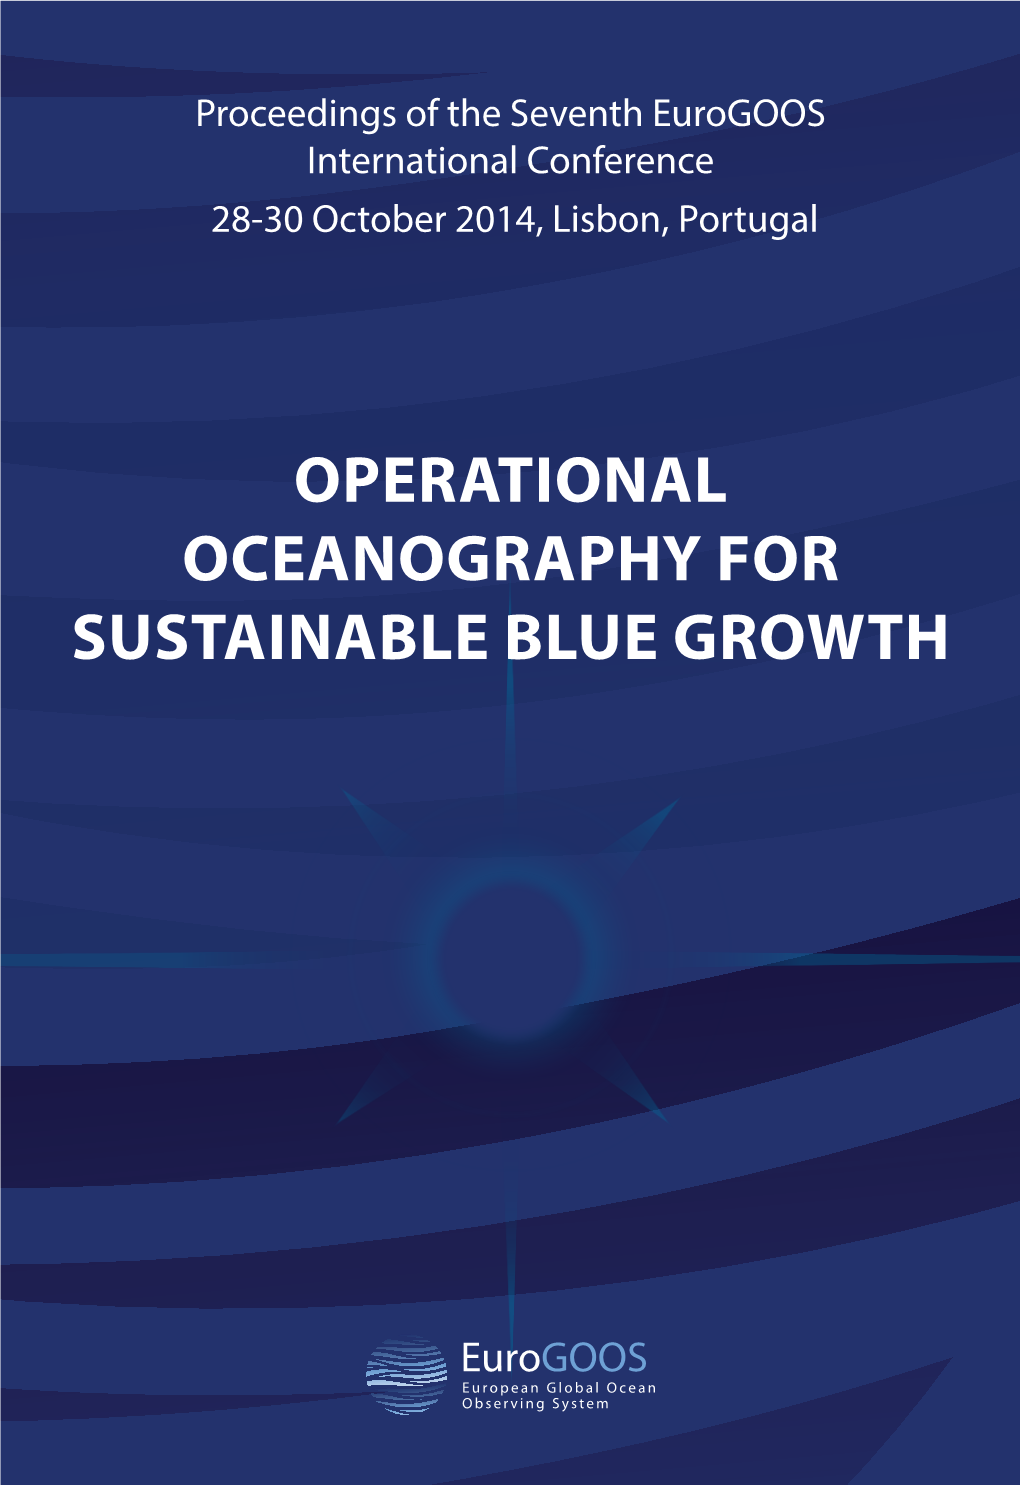 Operational Oceanography for Sustainable Blue Growth